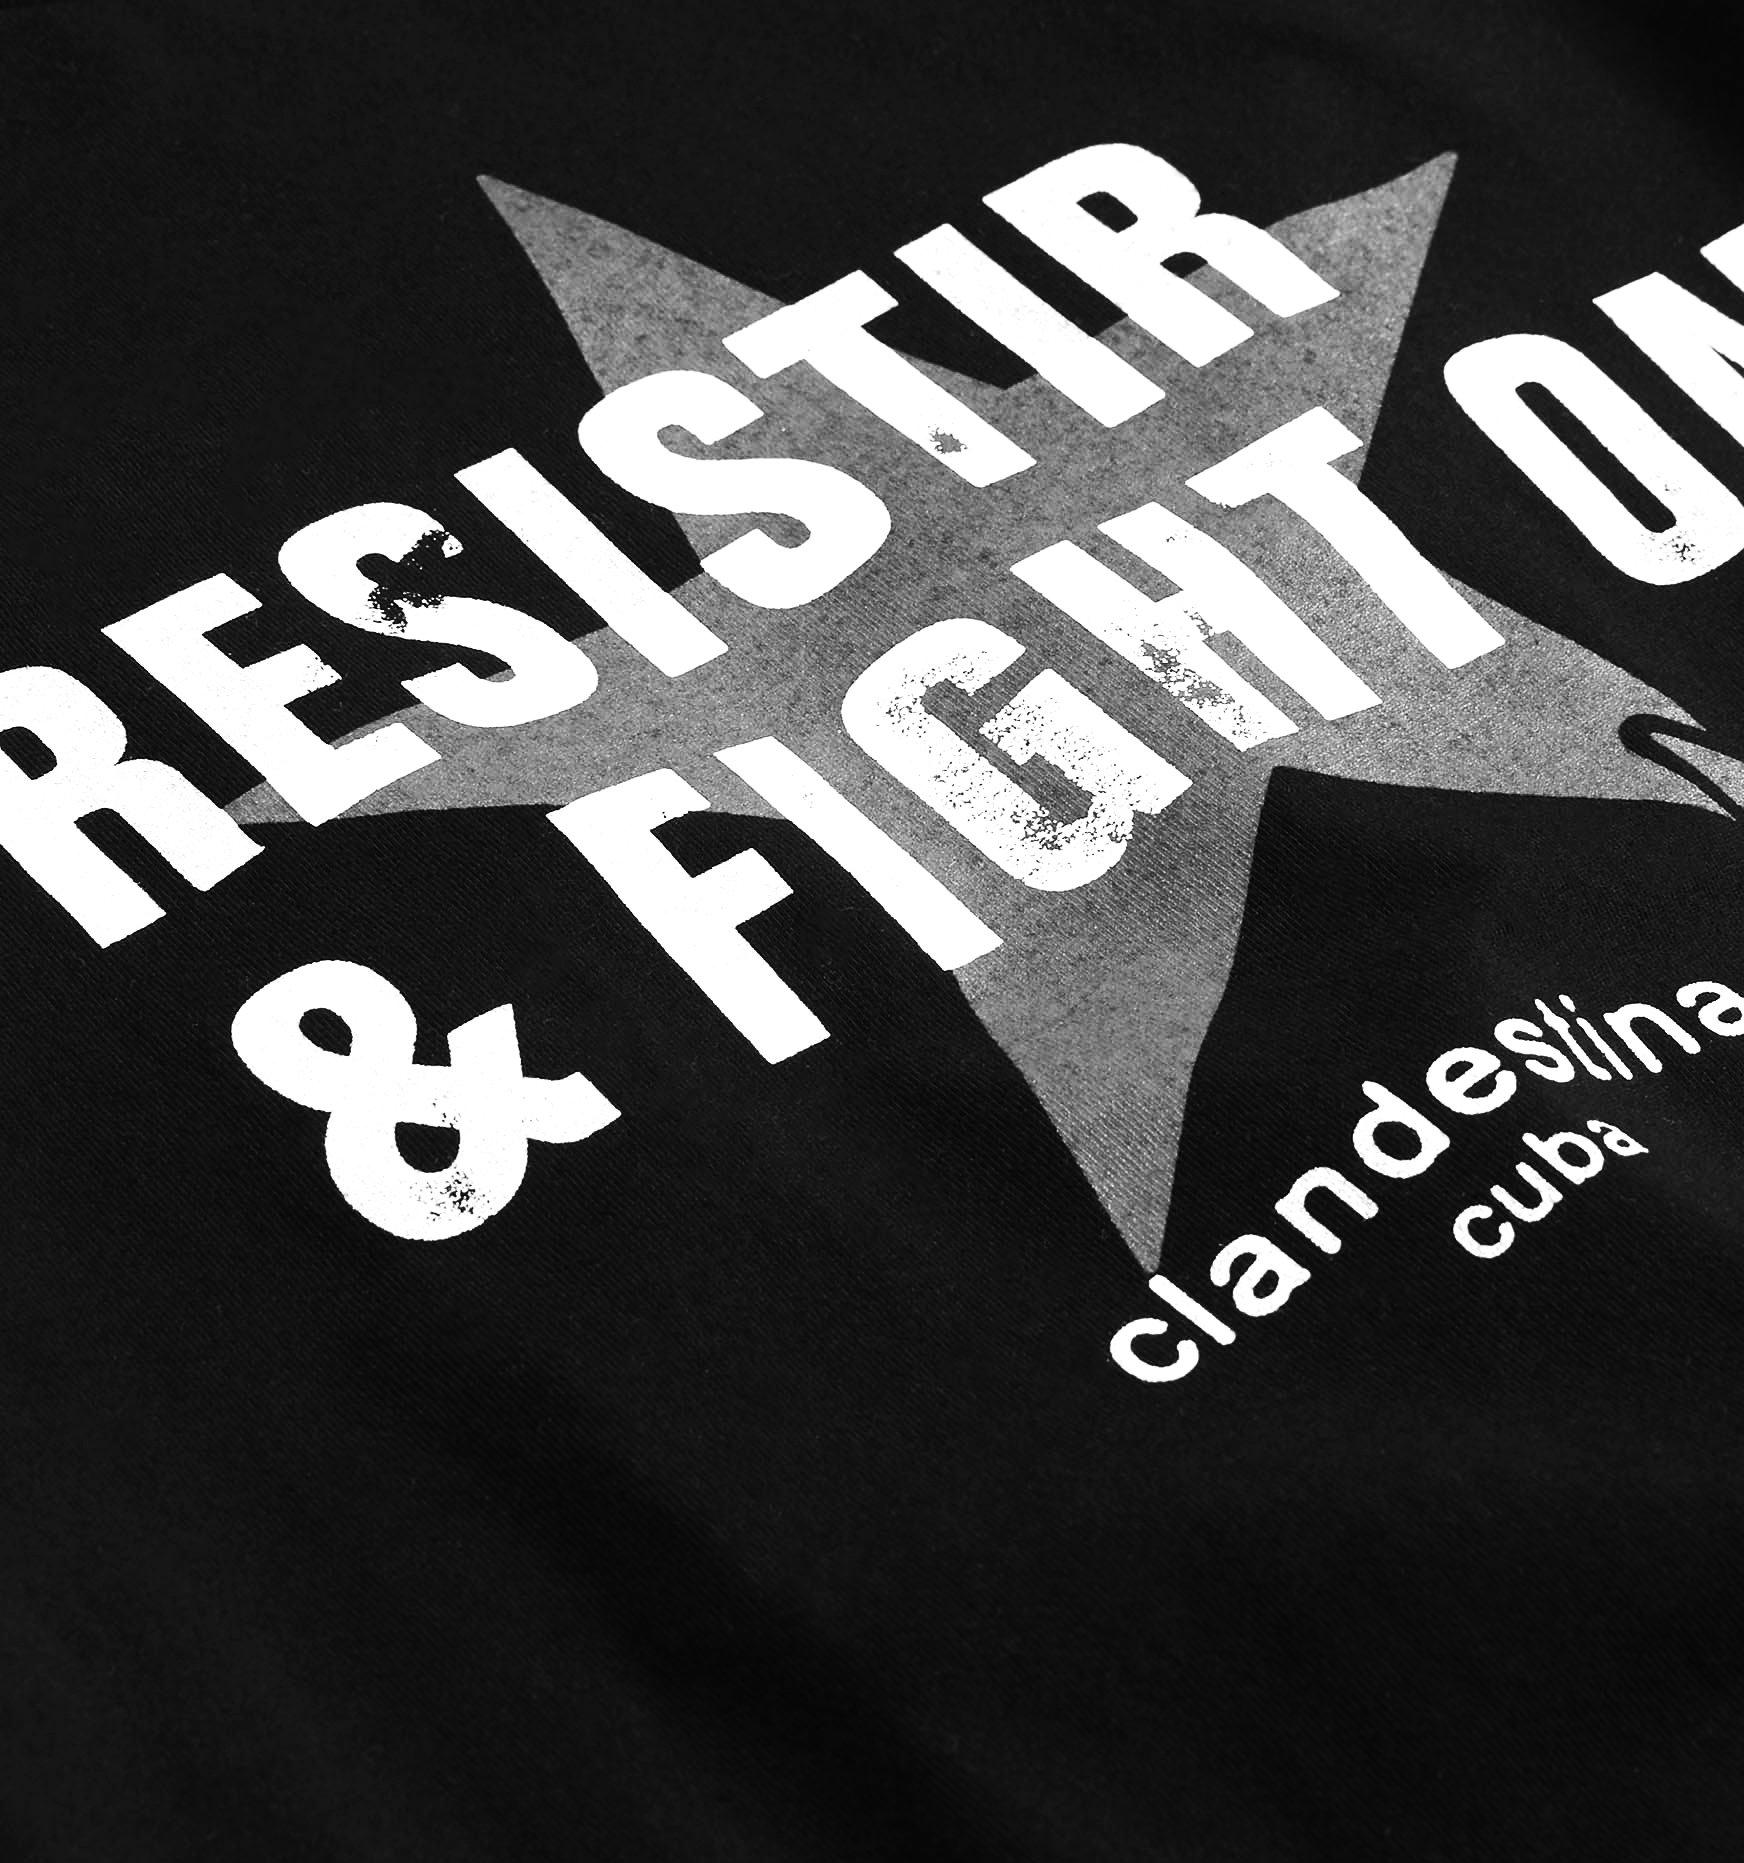 black and white image of the Resistir and Fight on Clandestina collaboration shirt.